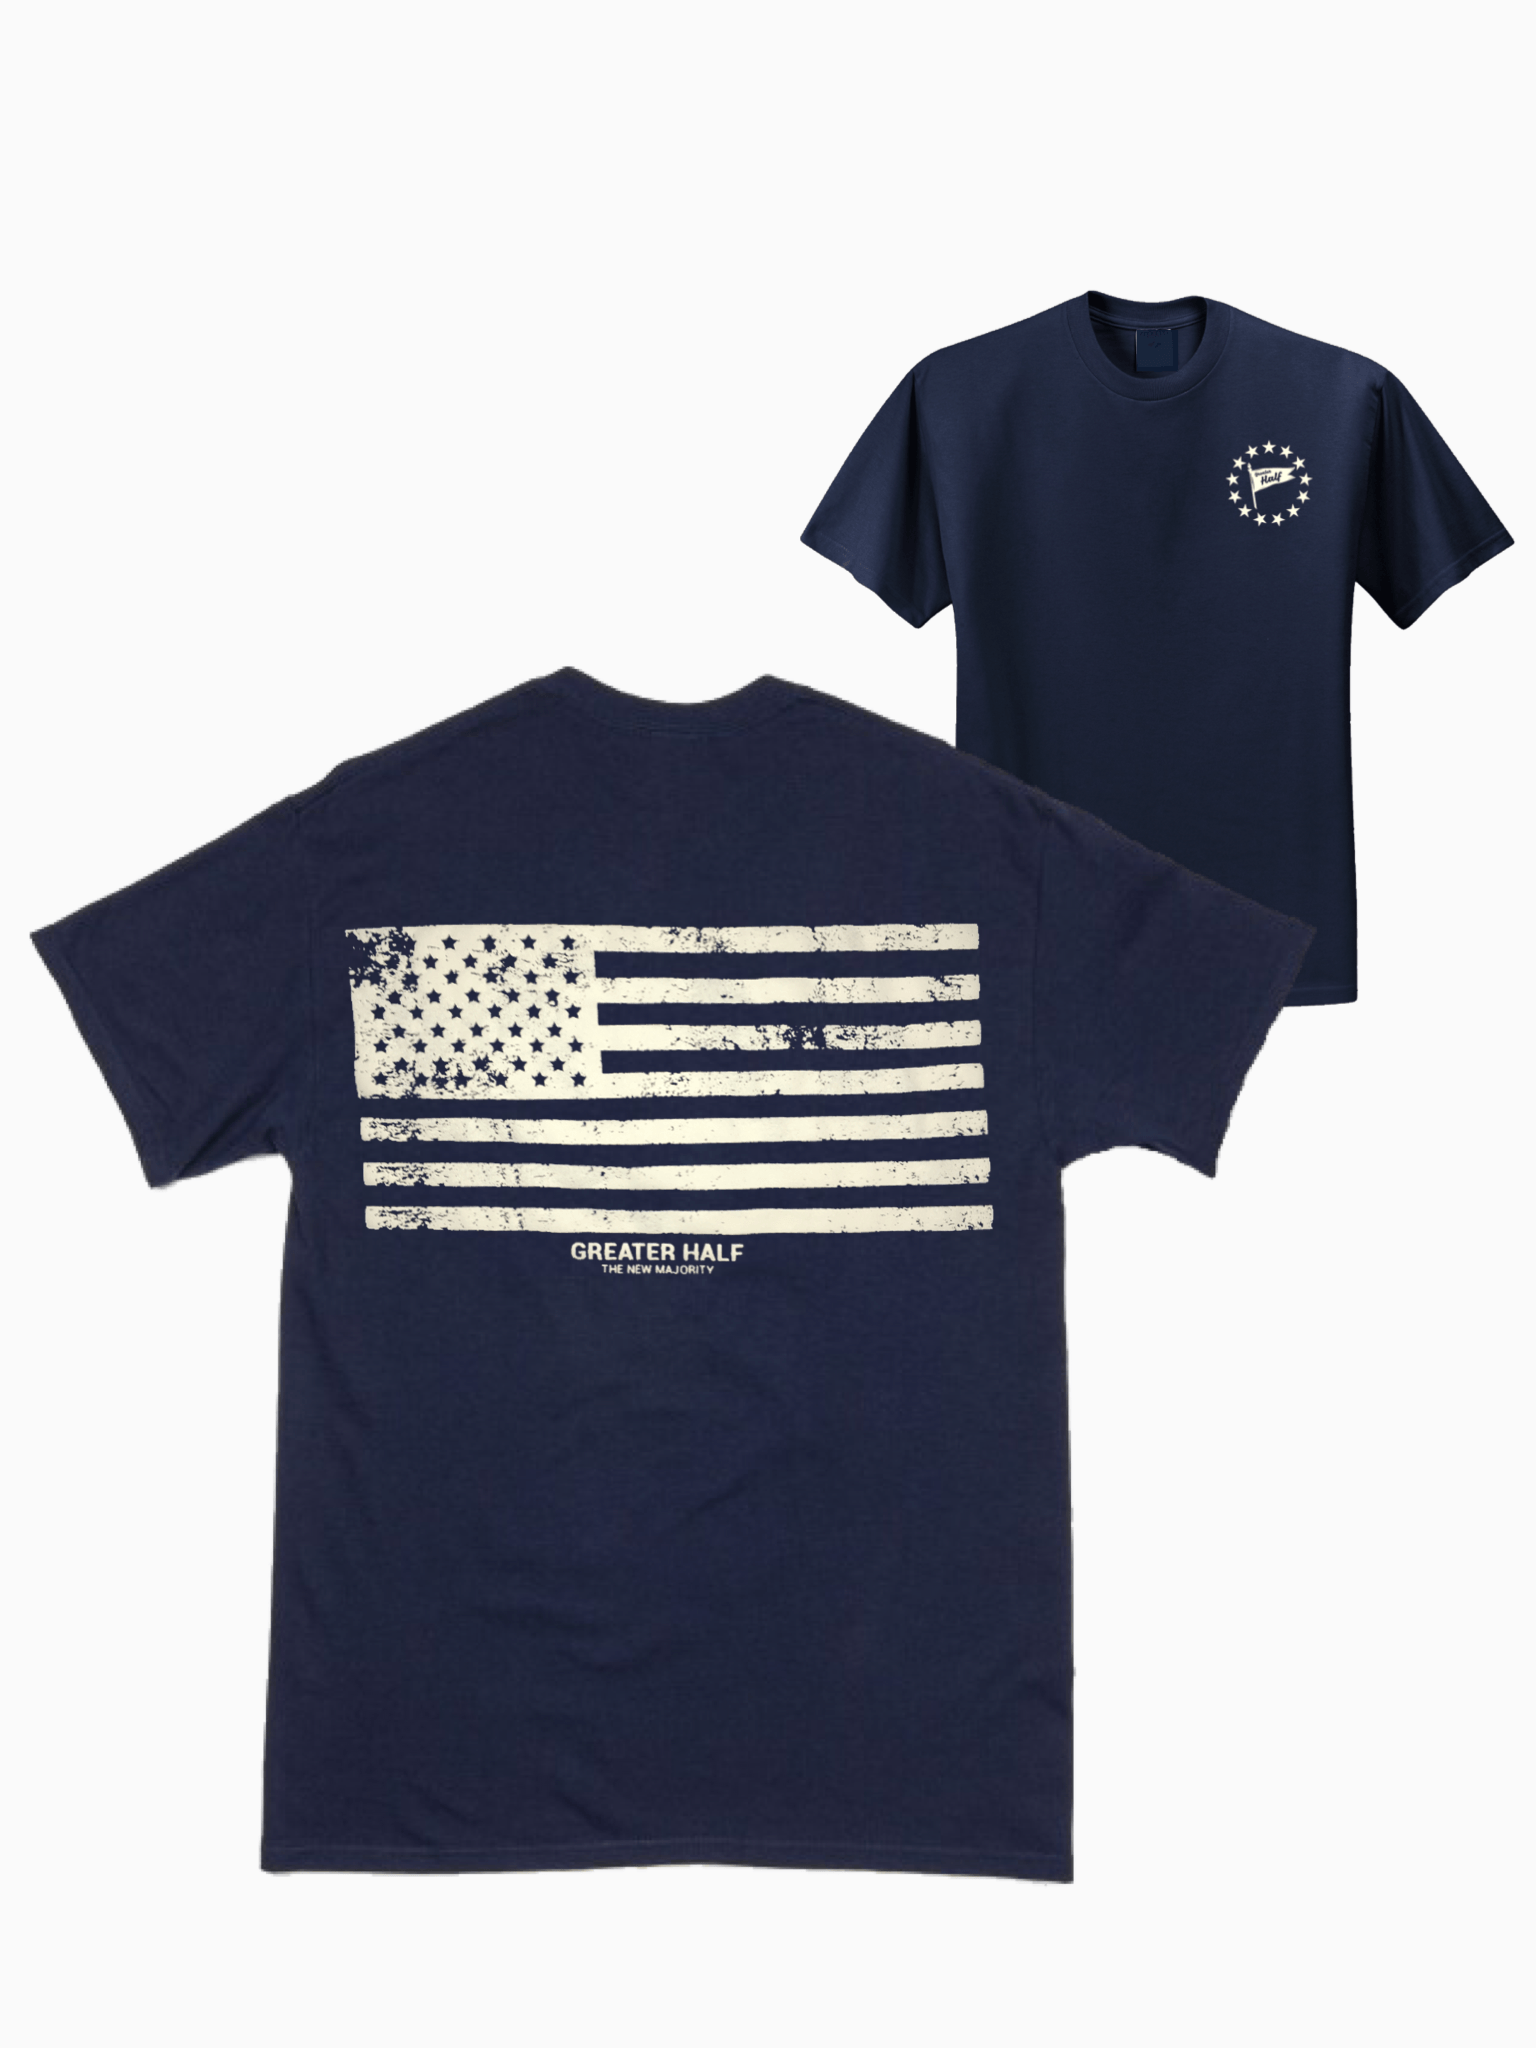 Thumbnail for The Rugged Patriot T-Shirt - Greater Half